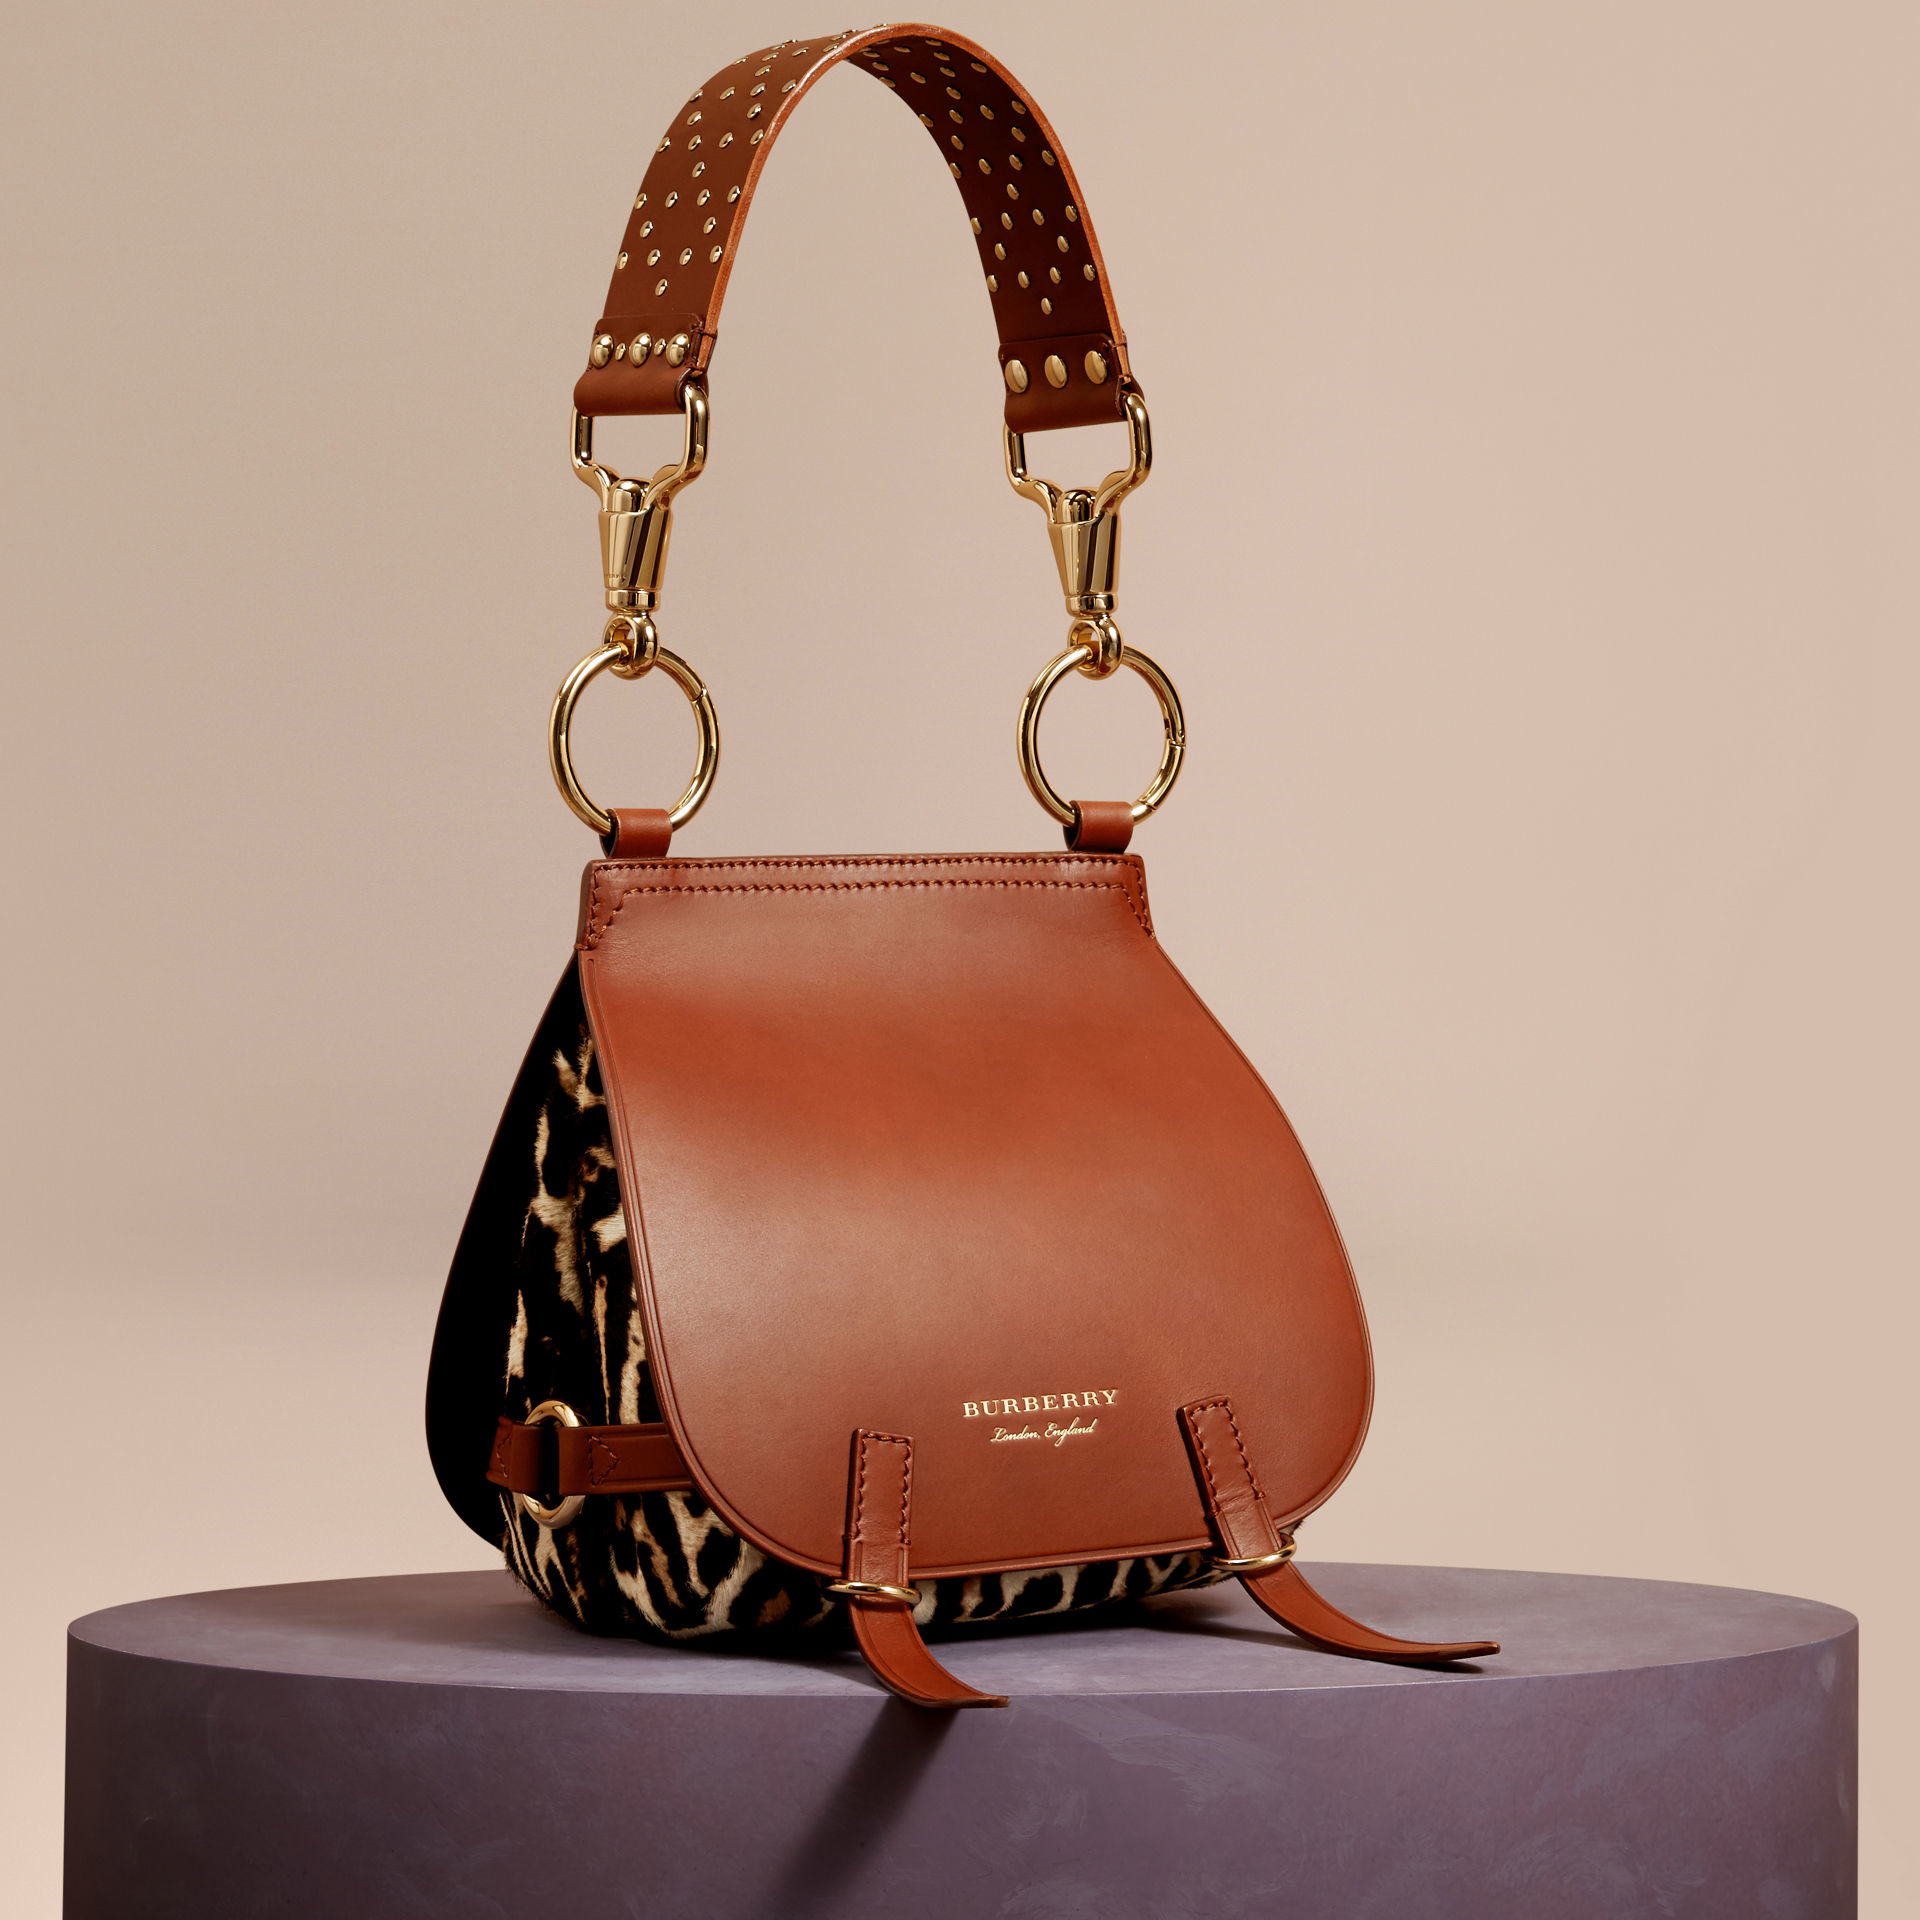 Lyst - Burberry The Bridle Leopard-Print Calfskin And Leather Shoulder Bag in Brown